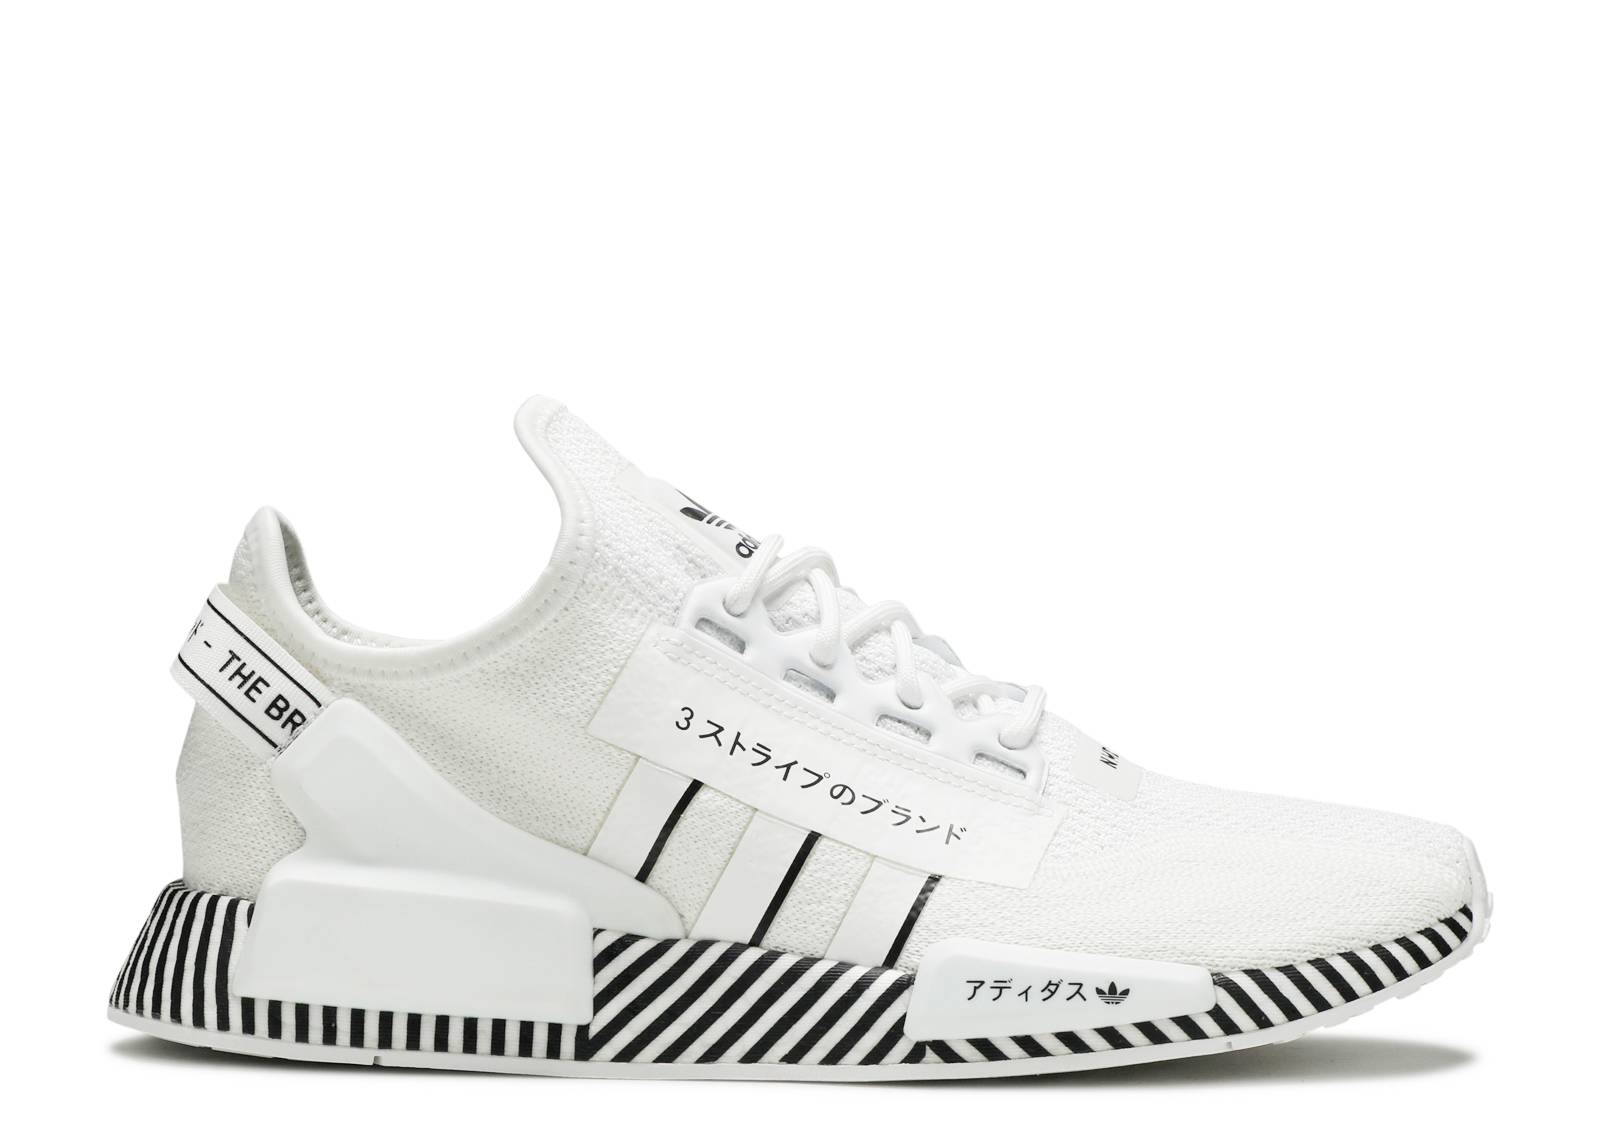 NMD_R1 V2 'Dazzle Pack - Cloud White'